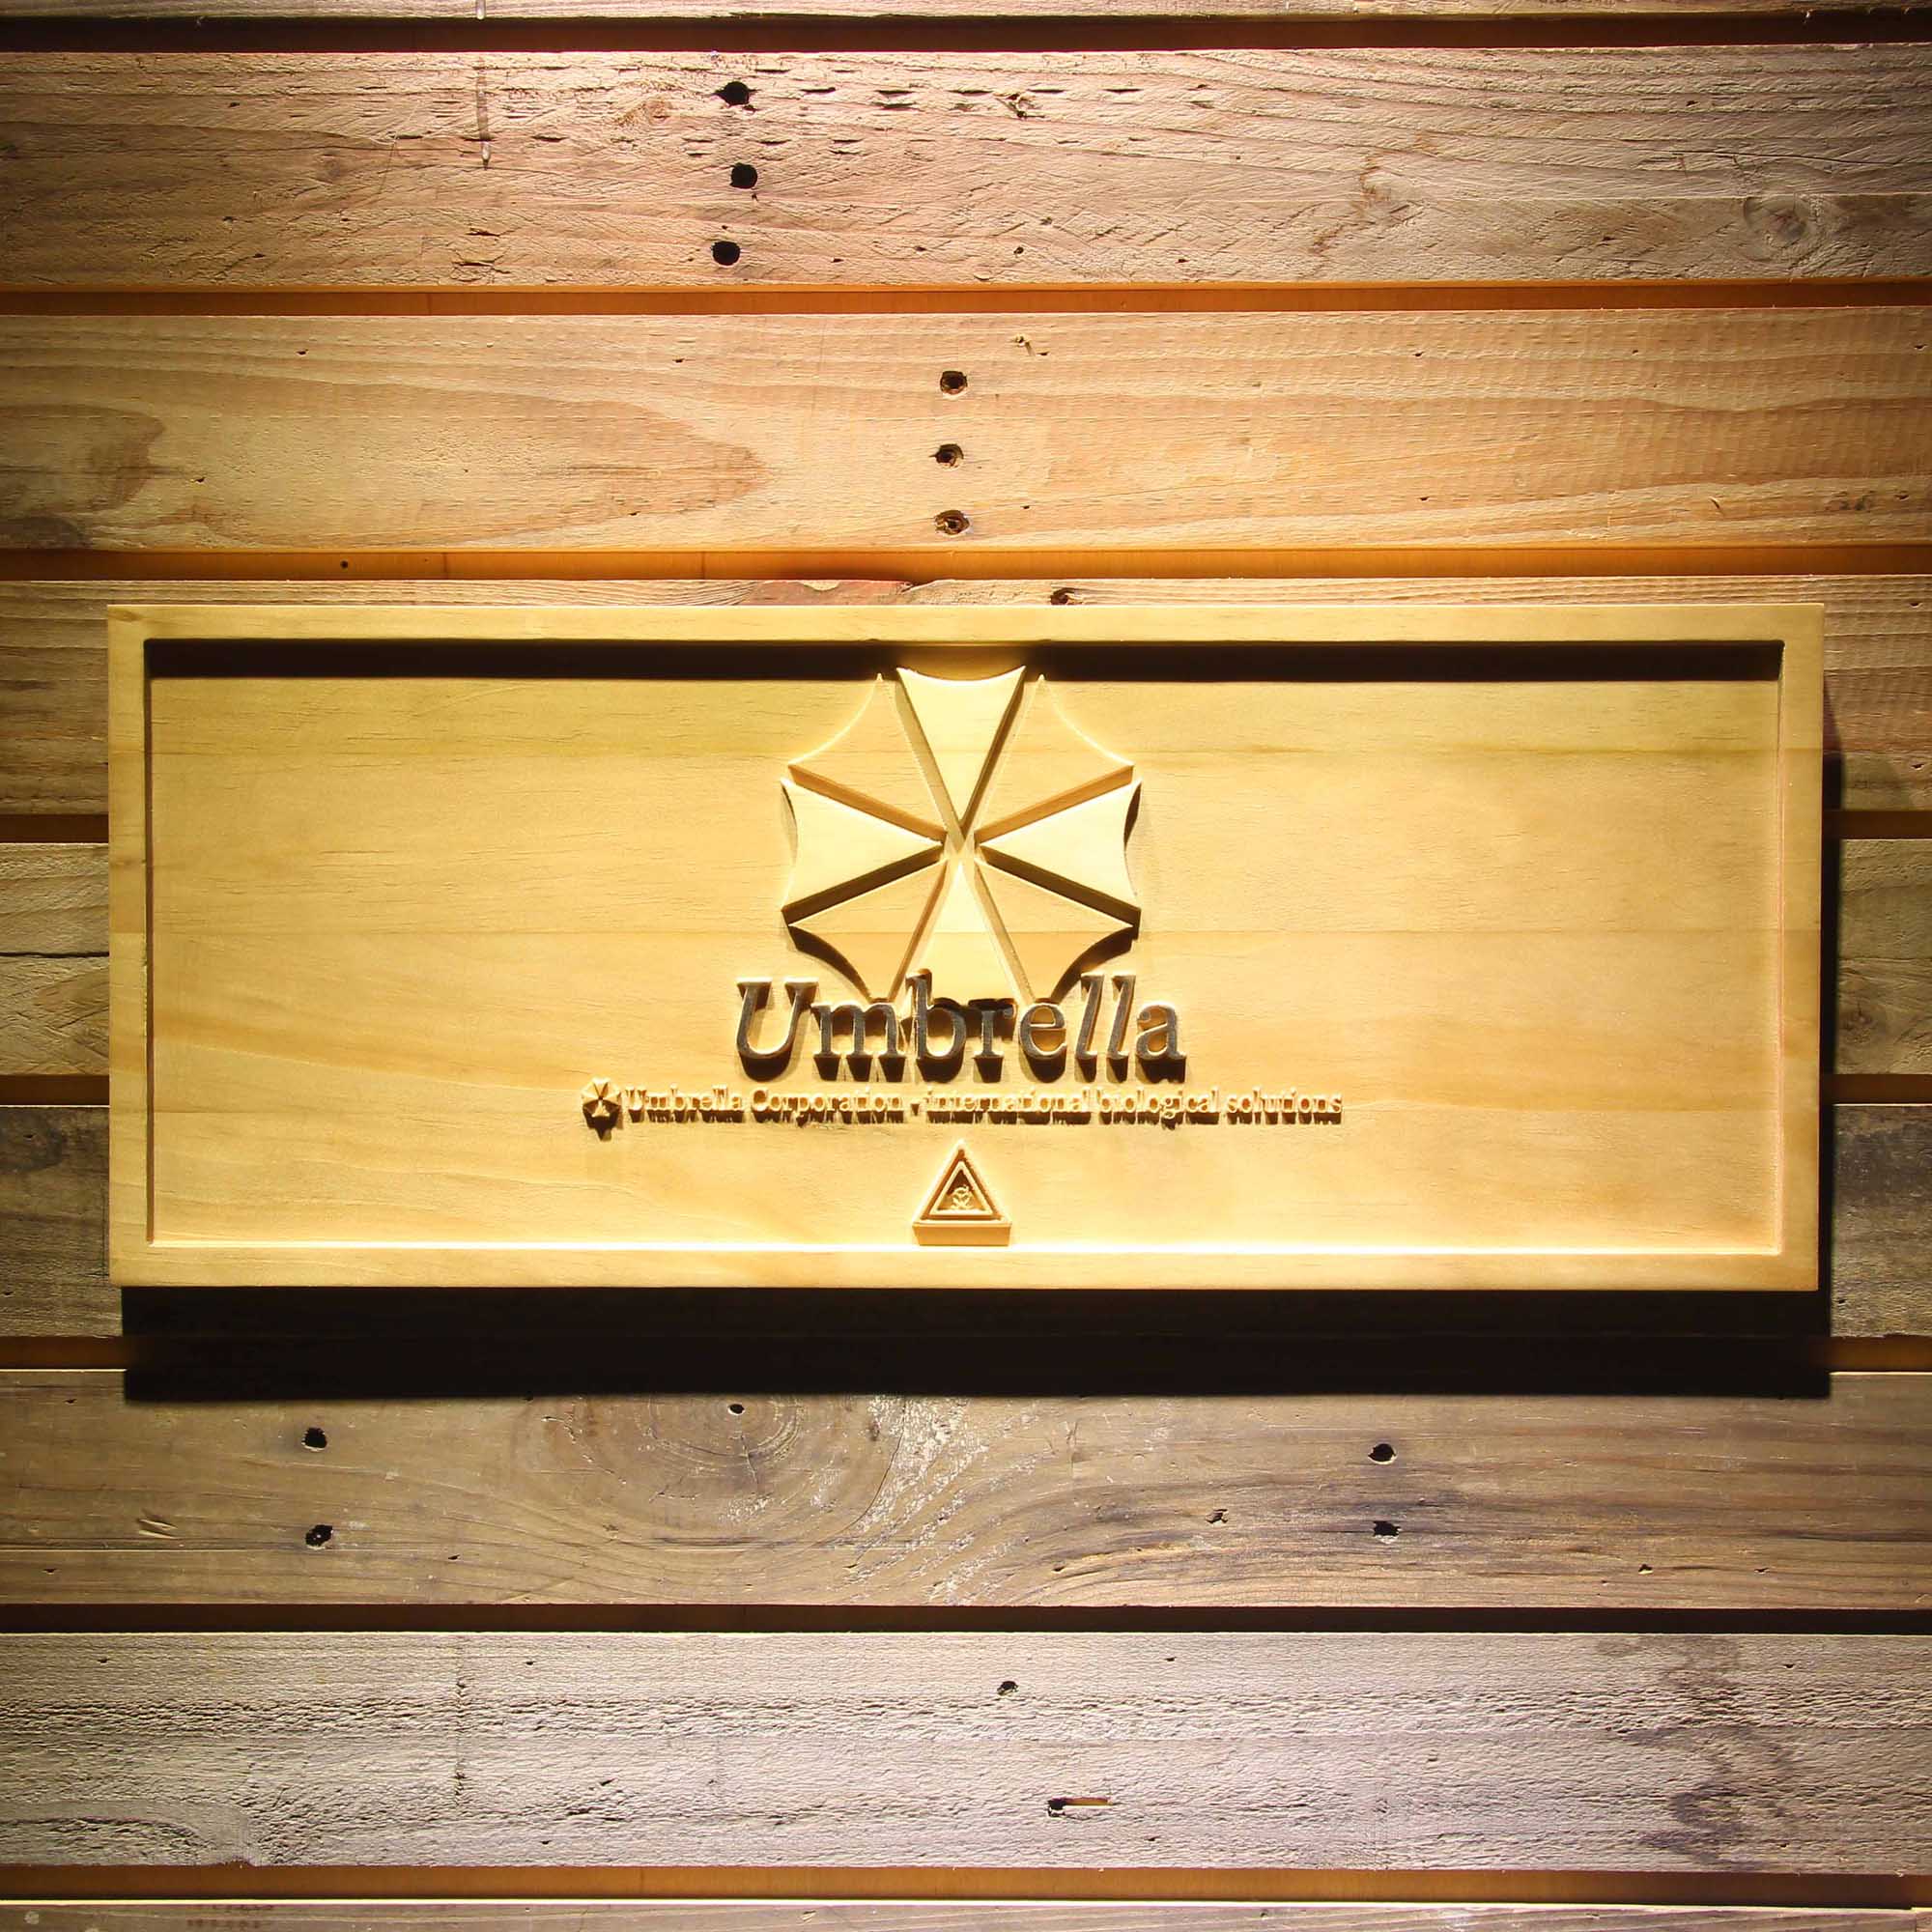 Resident Evil Umbrella Corp Our Business is Life Itself 3D Wooden Engrave Sign